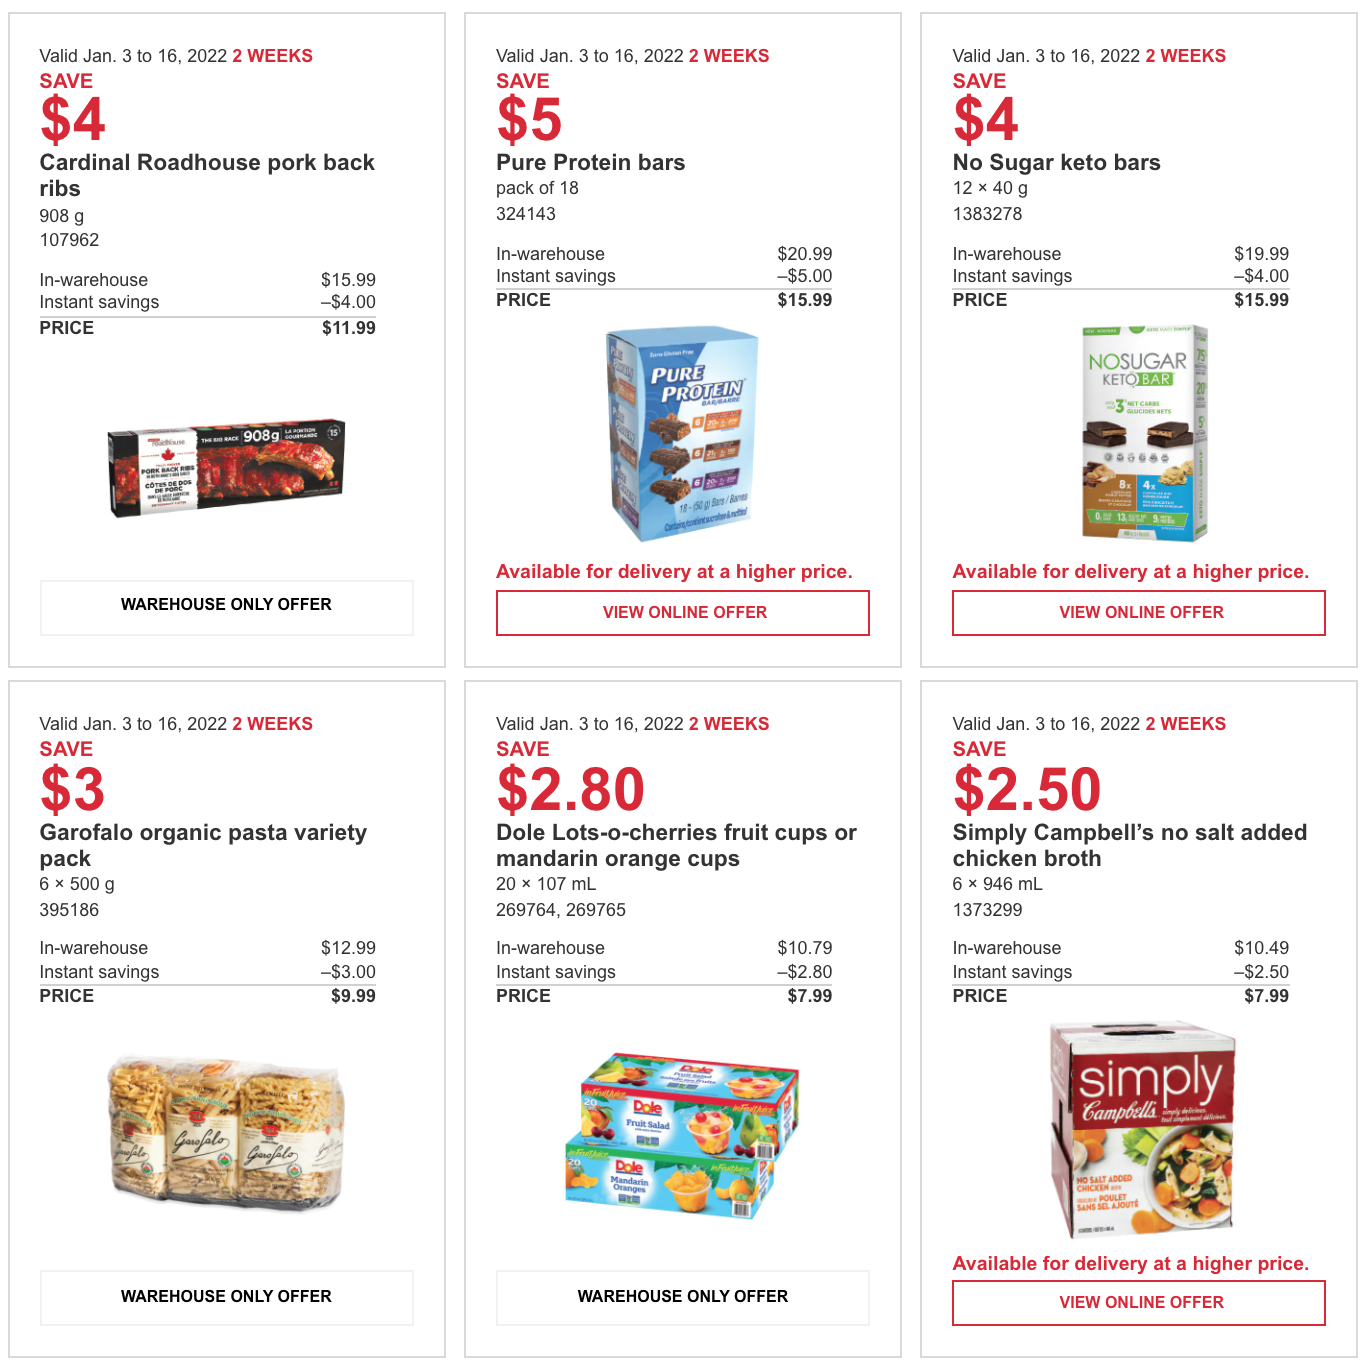 costco-canada-coupons-flyers-deals-at-all-costco-wholesale-warehouses